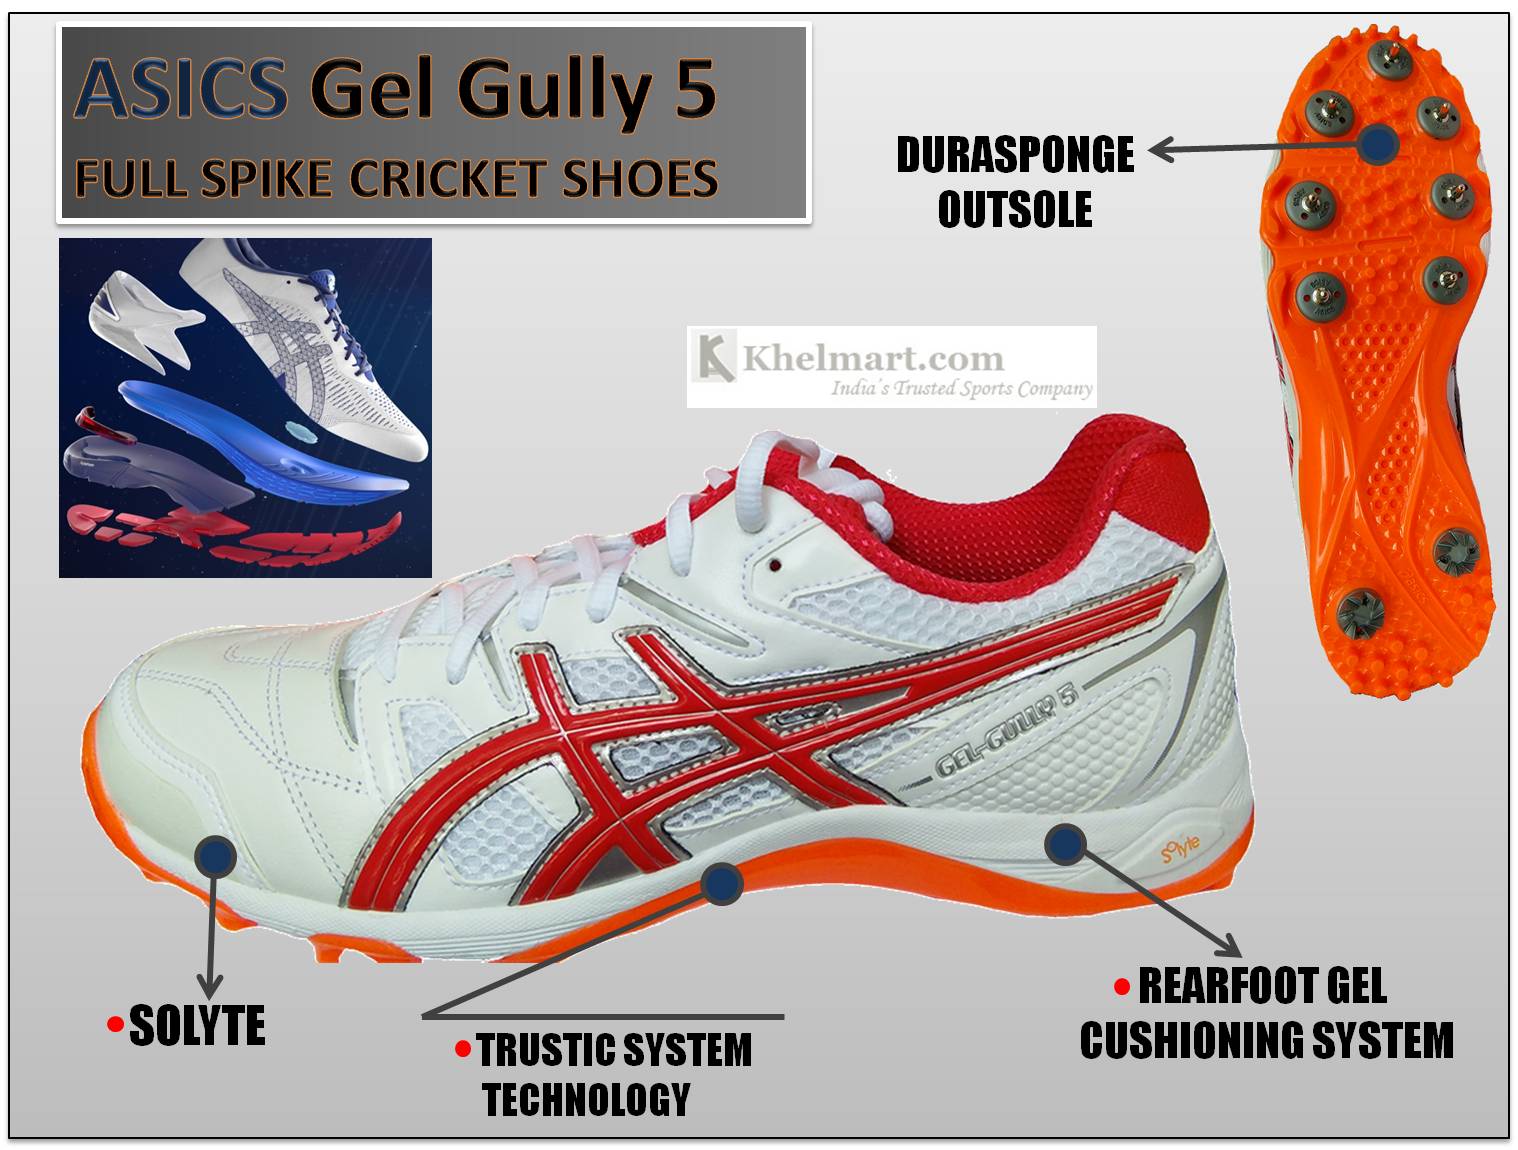 Asics_Gel_Gully_5_Full_Spike_Cricket_Shoes_color_WHITE_AND_RED_ALART.jpg